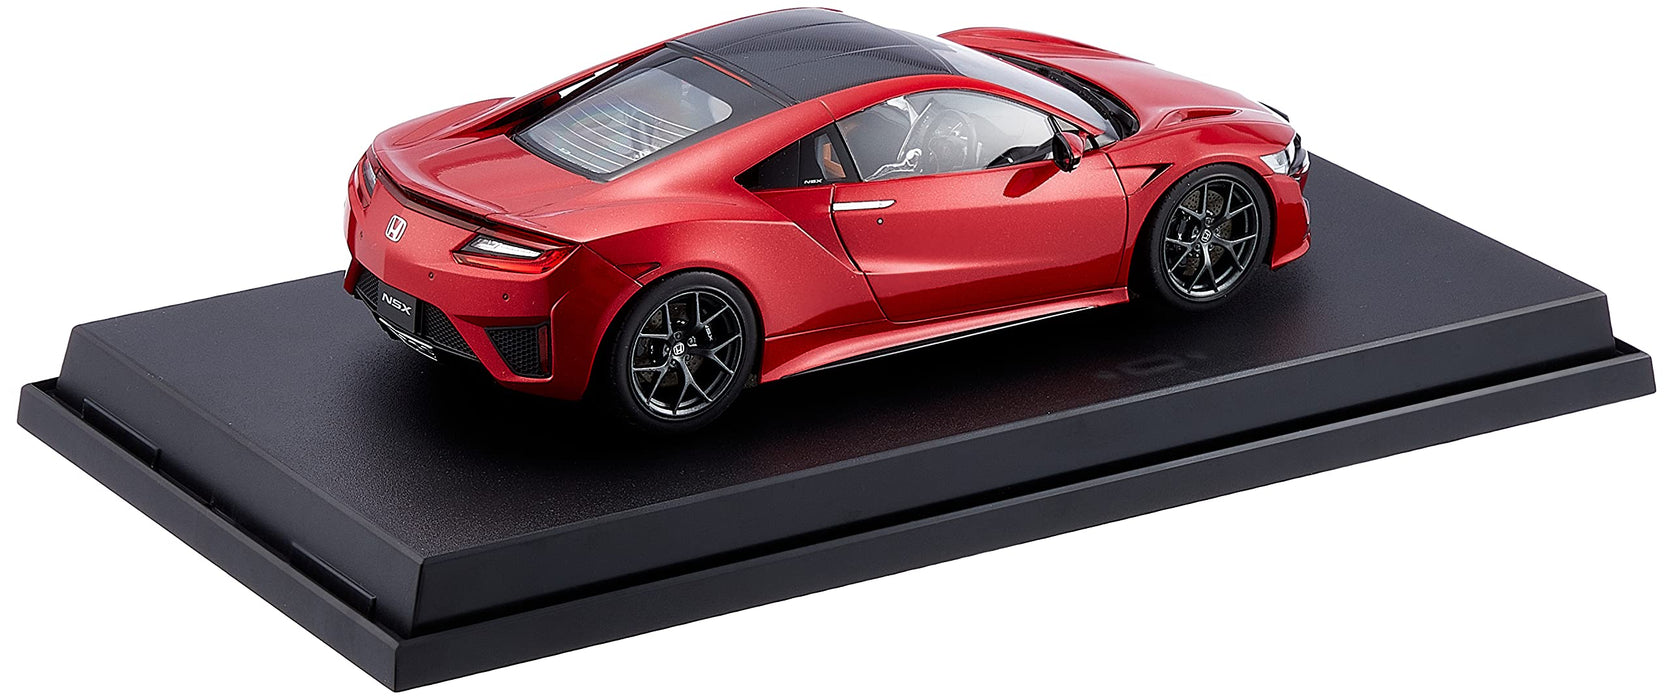 TAMIYA 21157 Nsx Red Masterwork Collection 1/24 Scale Finished Model